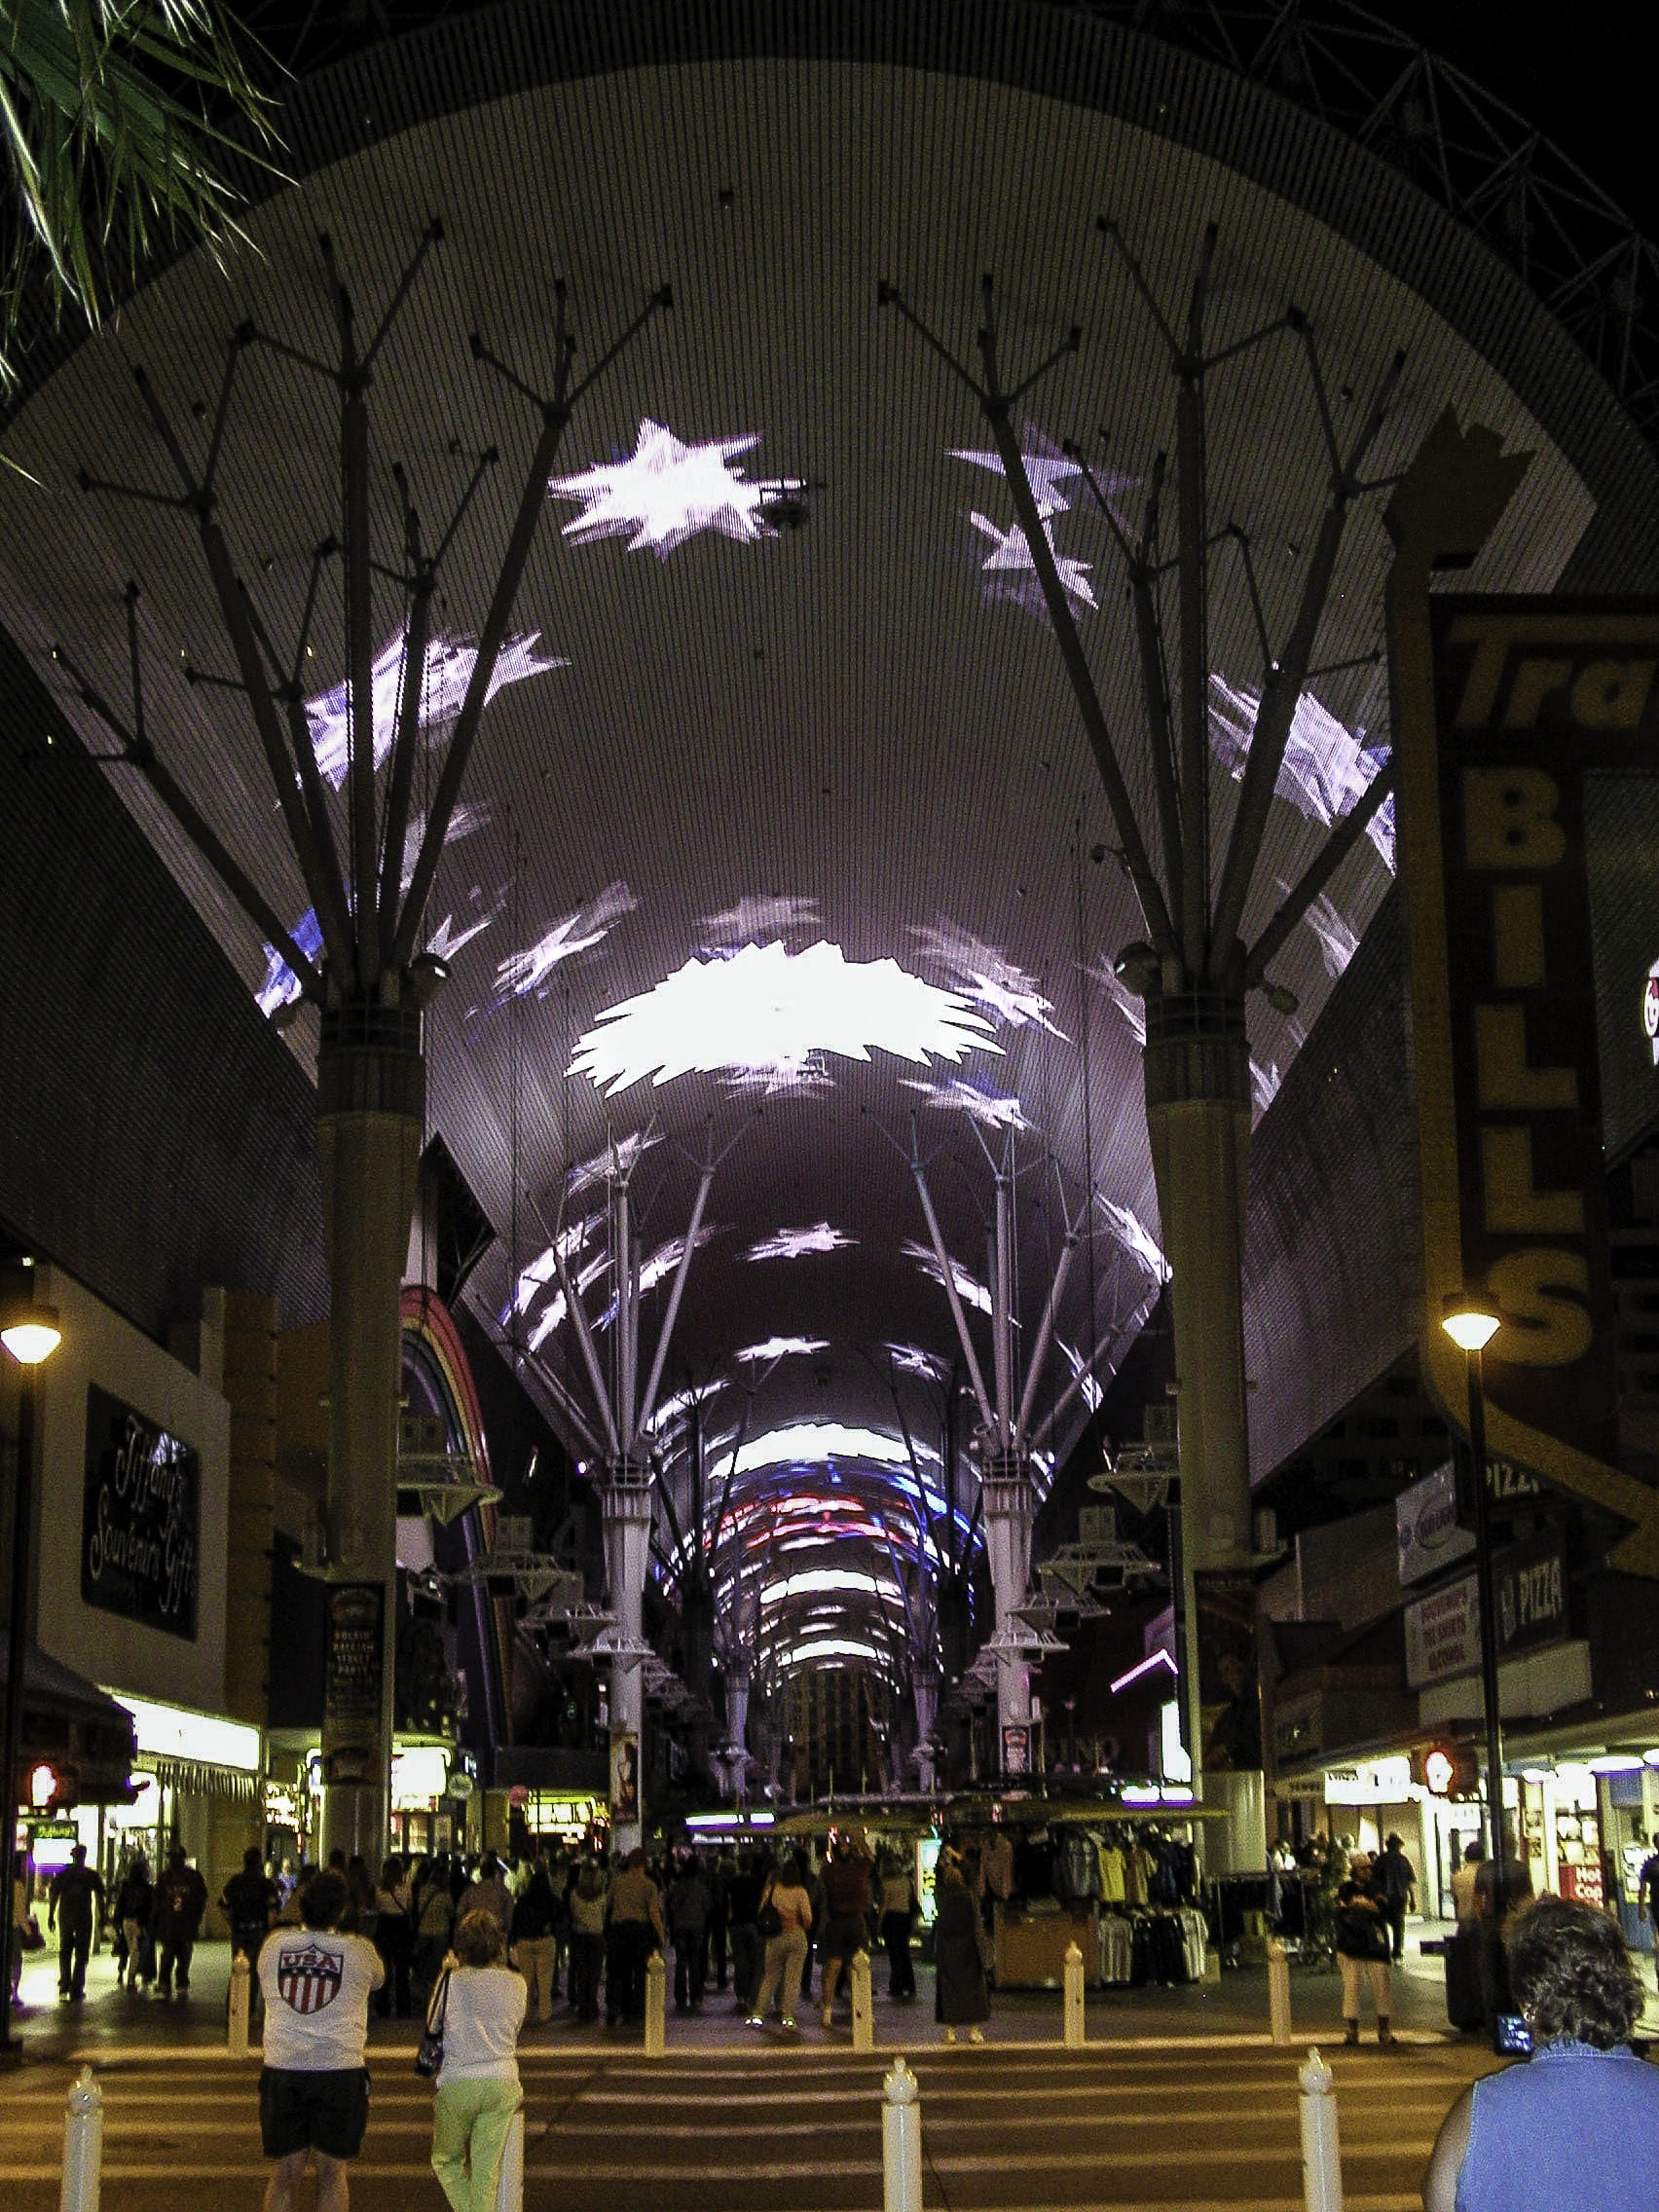 Light Up Your Life: My Unforgettable Night at the Fremont Street Experience